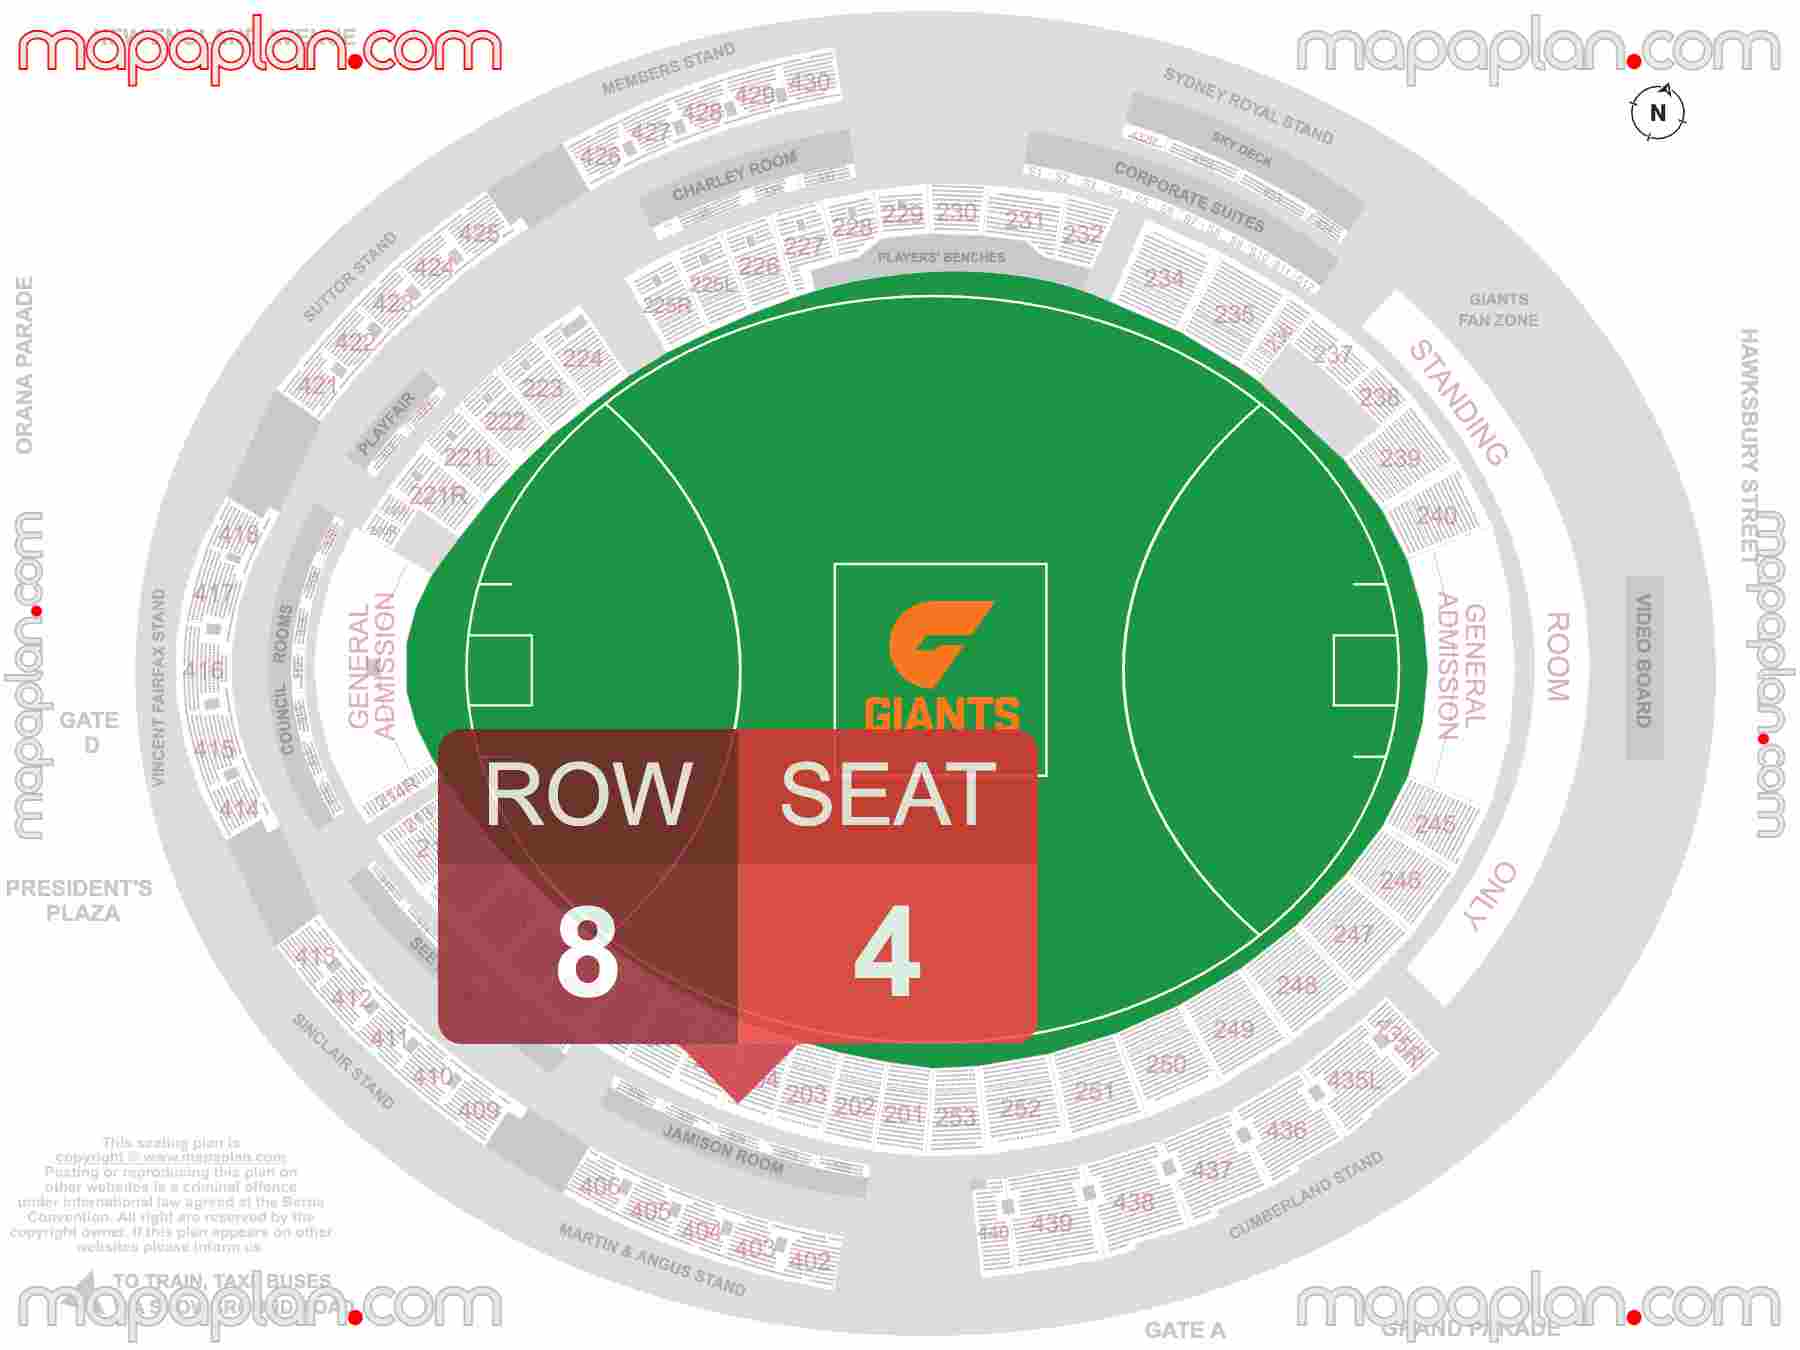 Sydney Showground Engie Stadium seating map Sydney Giants AFL football detailed seat numbers and row numbering map with interactive map plan layout